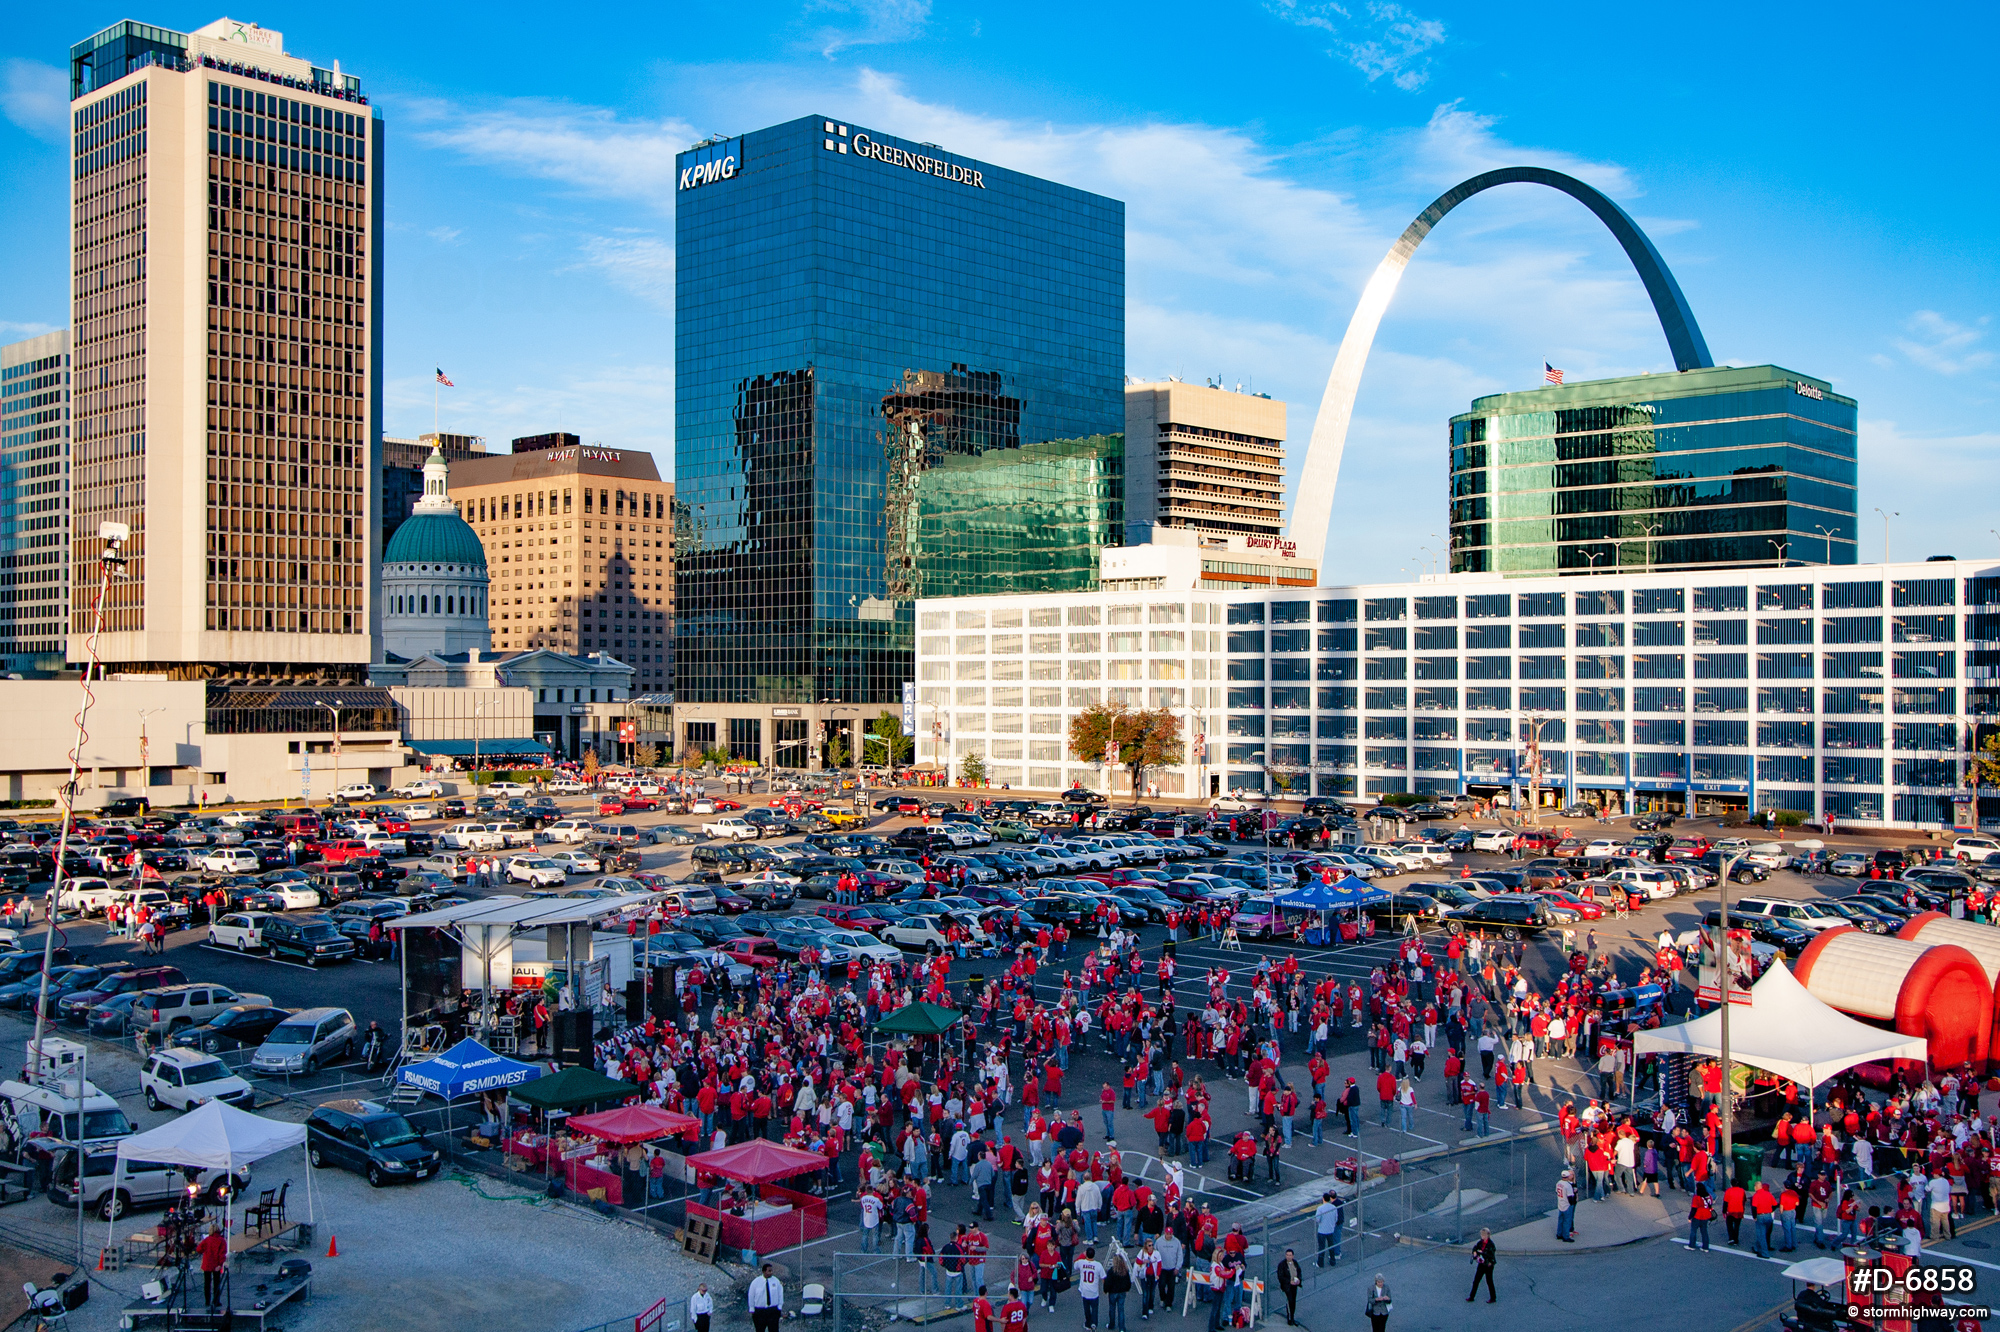 NLCS festivities outside of Busch Stadium before Game 5